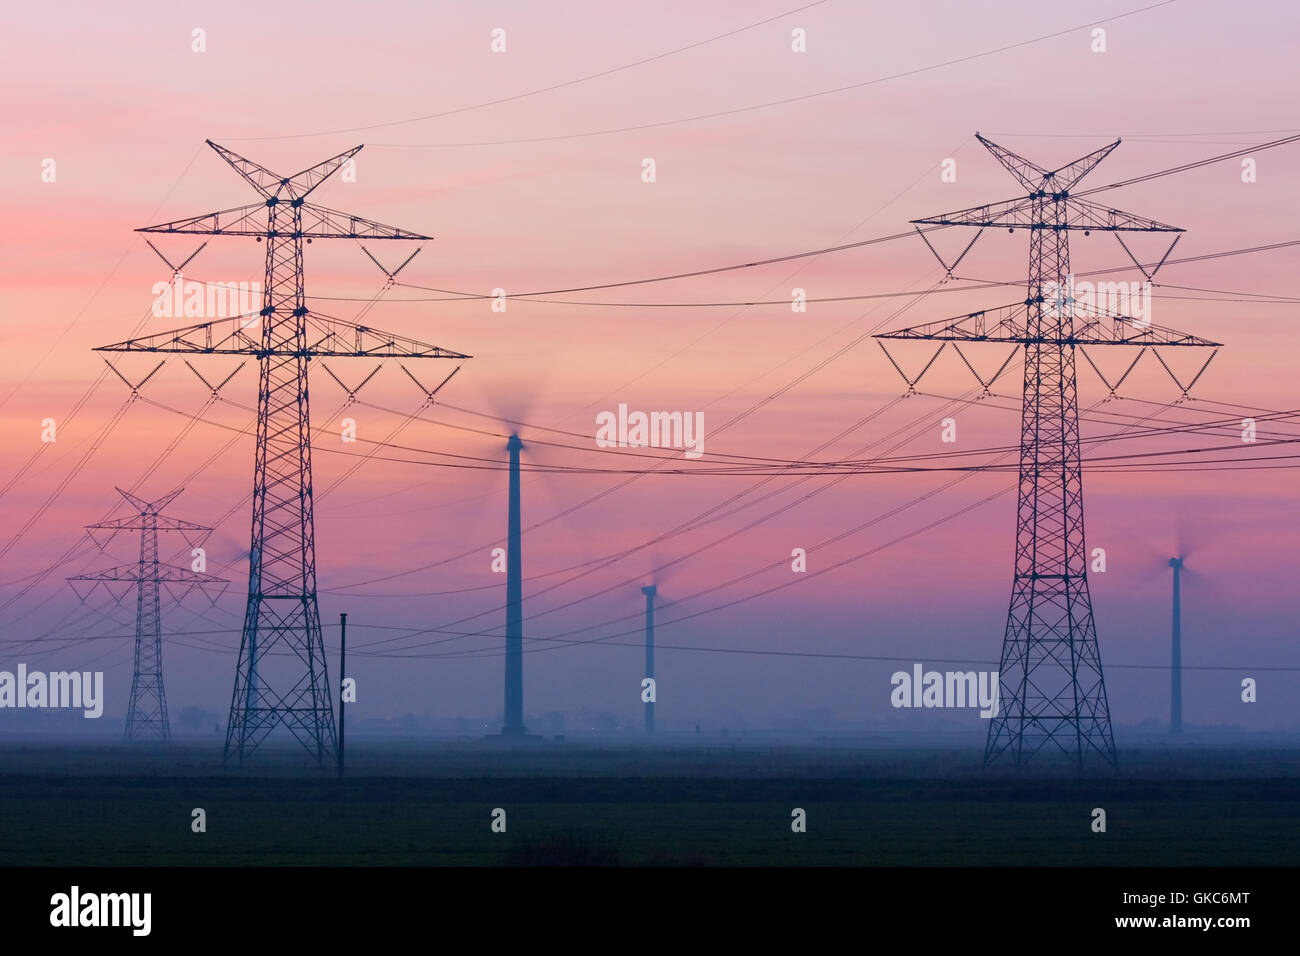 electricity pylons and wind turbines at dusk Stock Photo